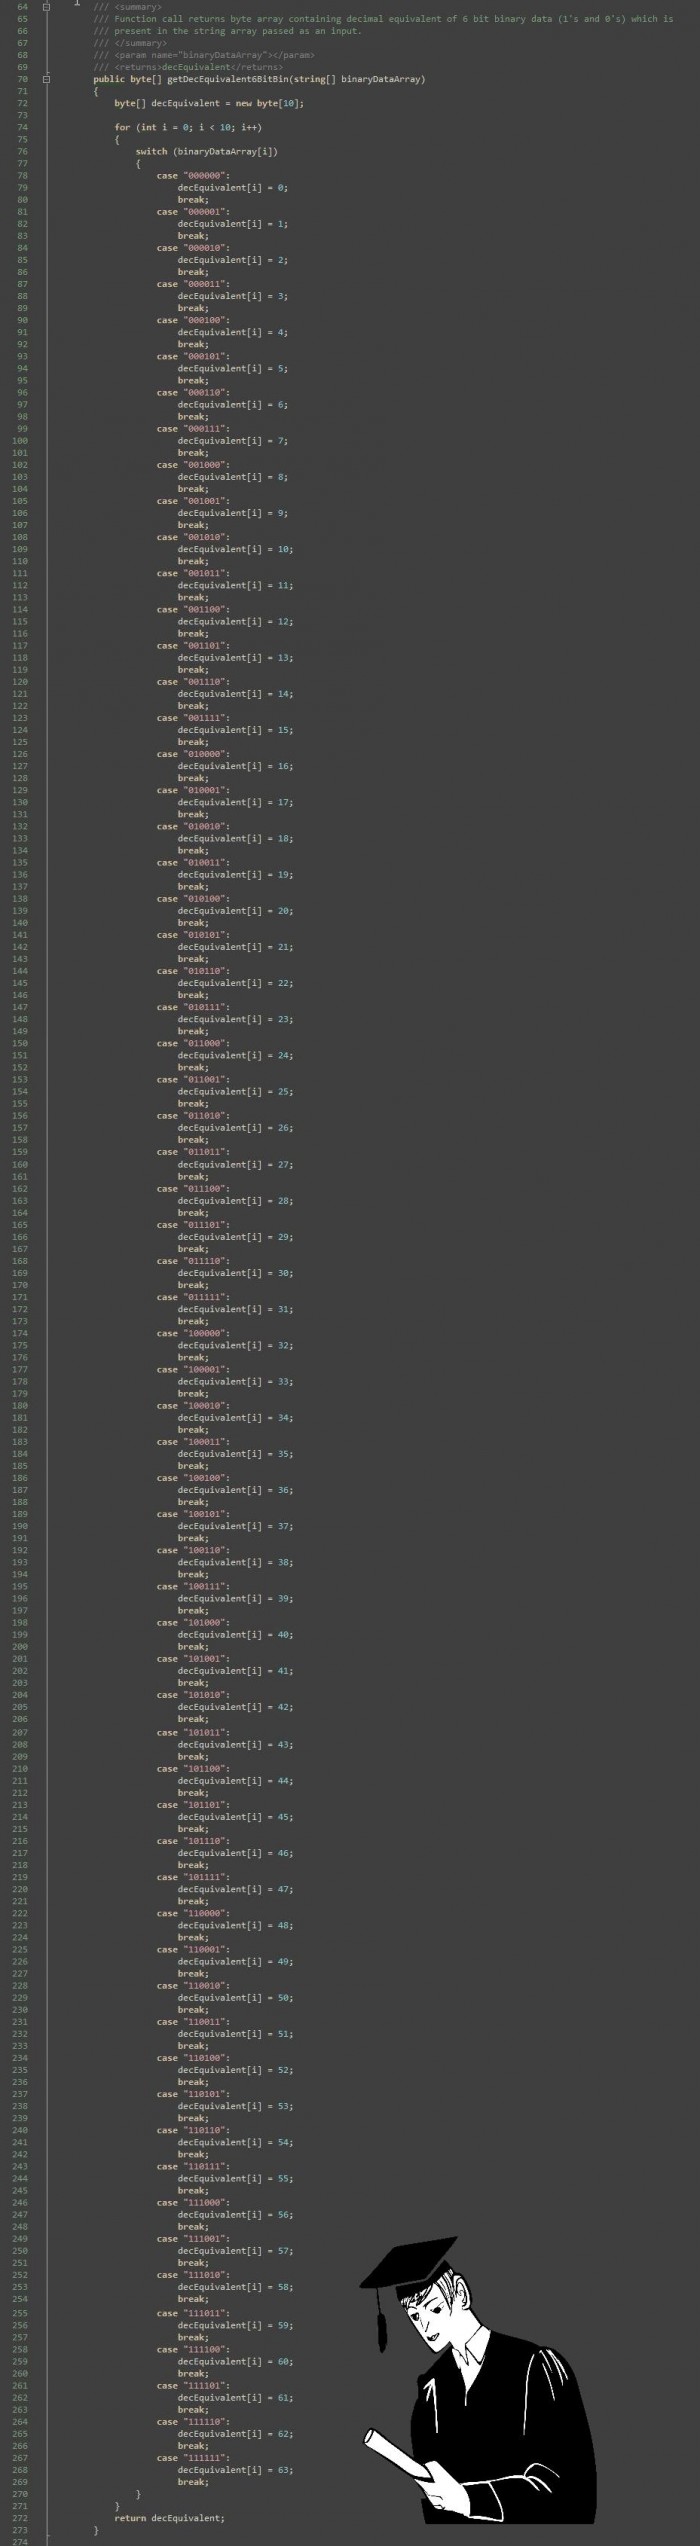 The crown jewel of my "shitty programming" screenshots, taken out of production code where I work